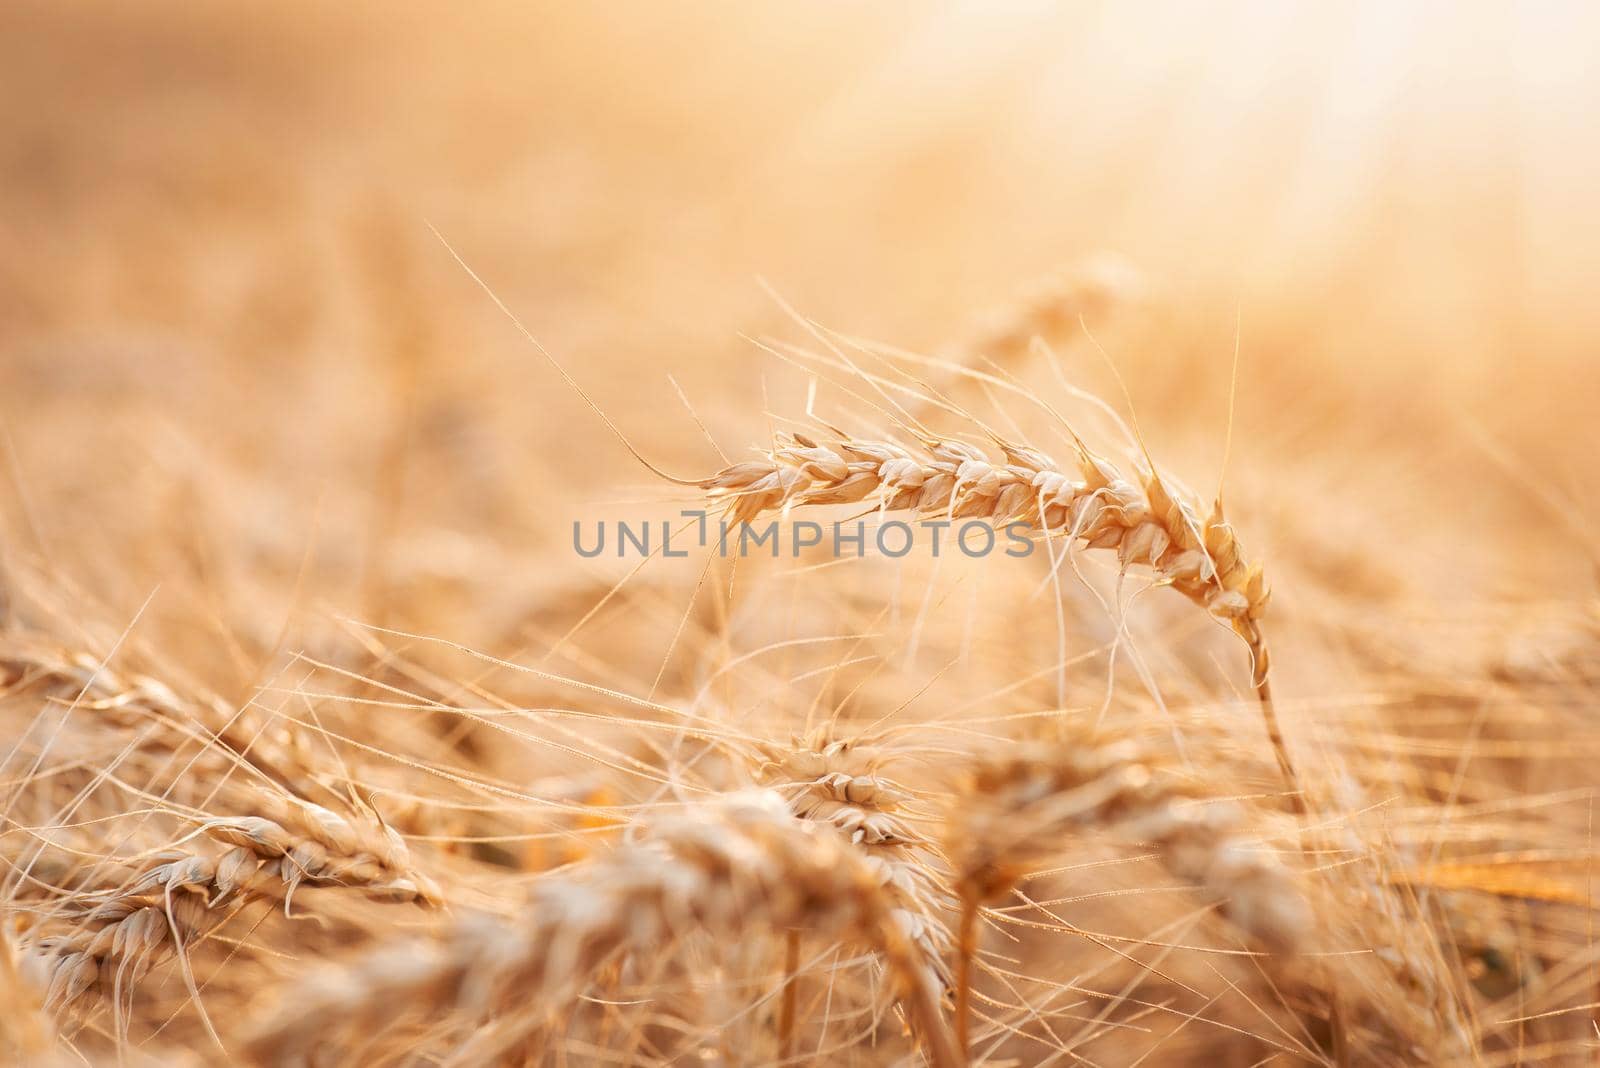 Colorful shot of ripe grain ready to be harvested